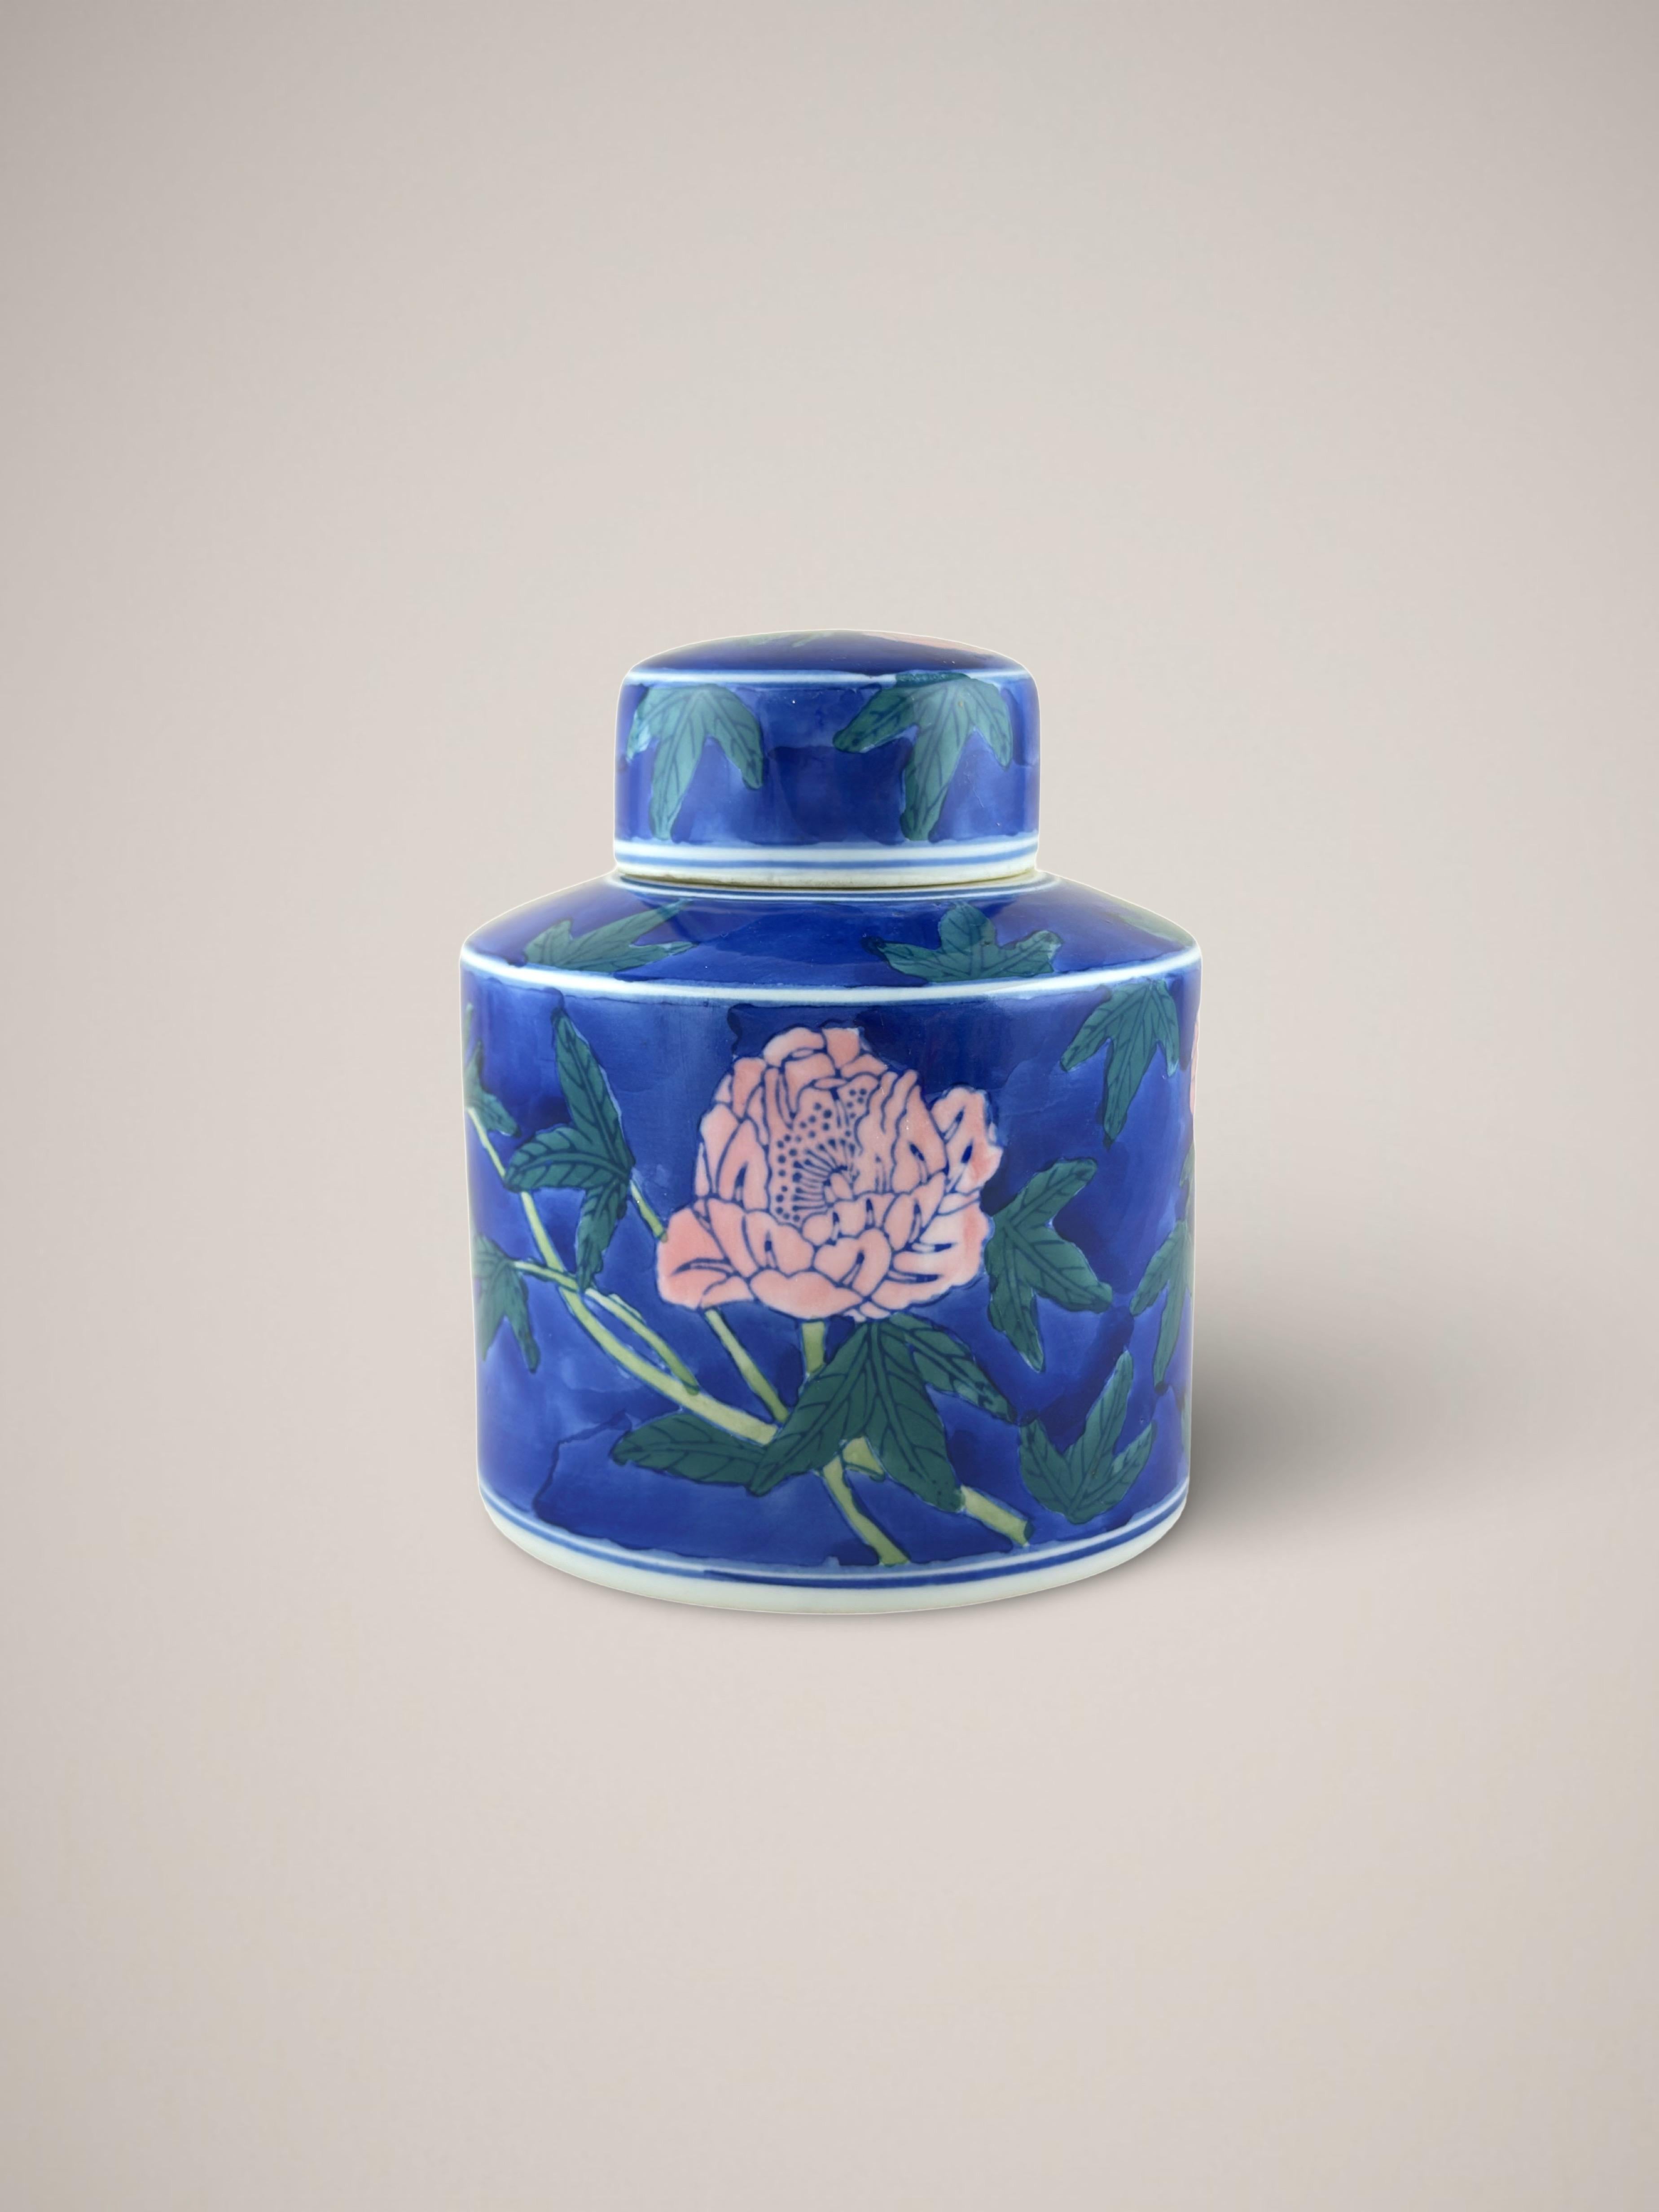 Vintage Chinese ginger jar—a bright and colorful modern 'Famille Rose' iteration, crafted in China towards the latter end of the 20th century, specifically during the 1980s.

Decorated with an expressive hand-painted scene of a singular peony flower